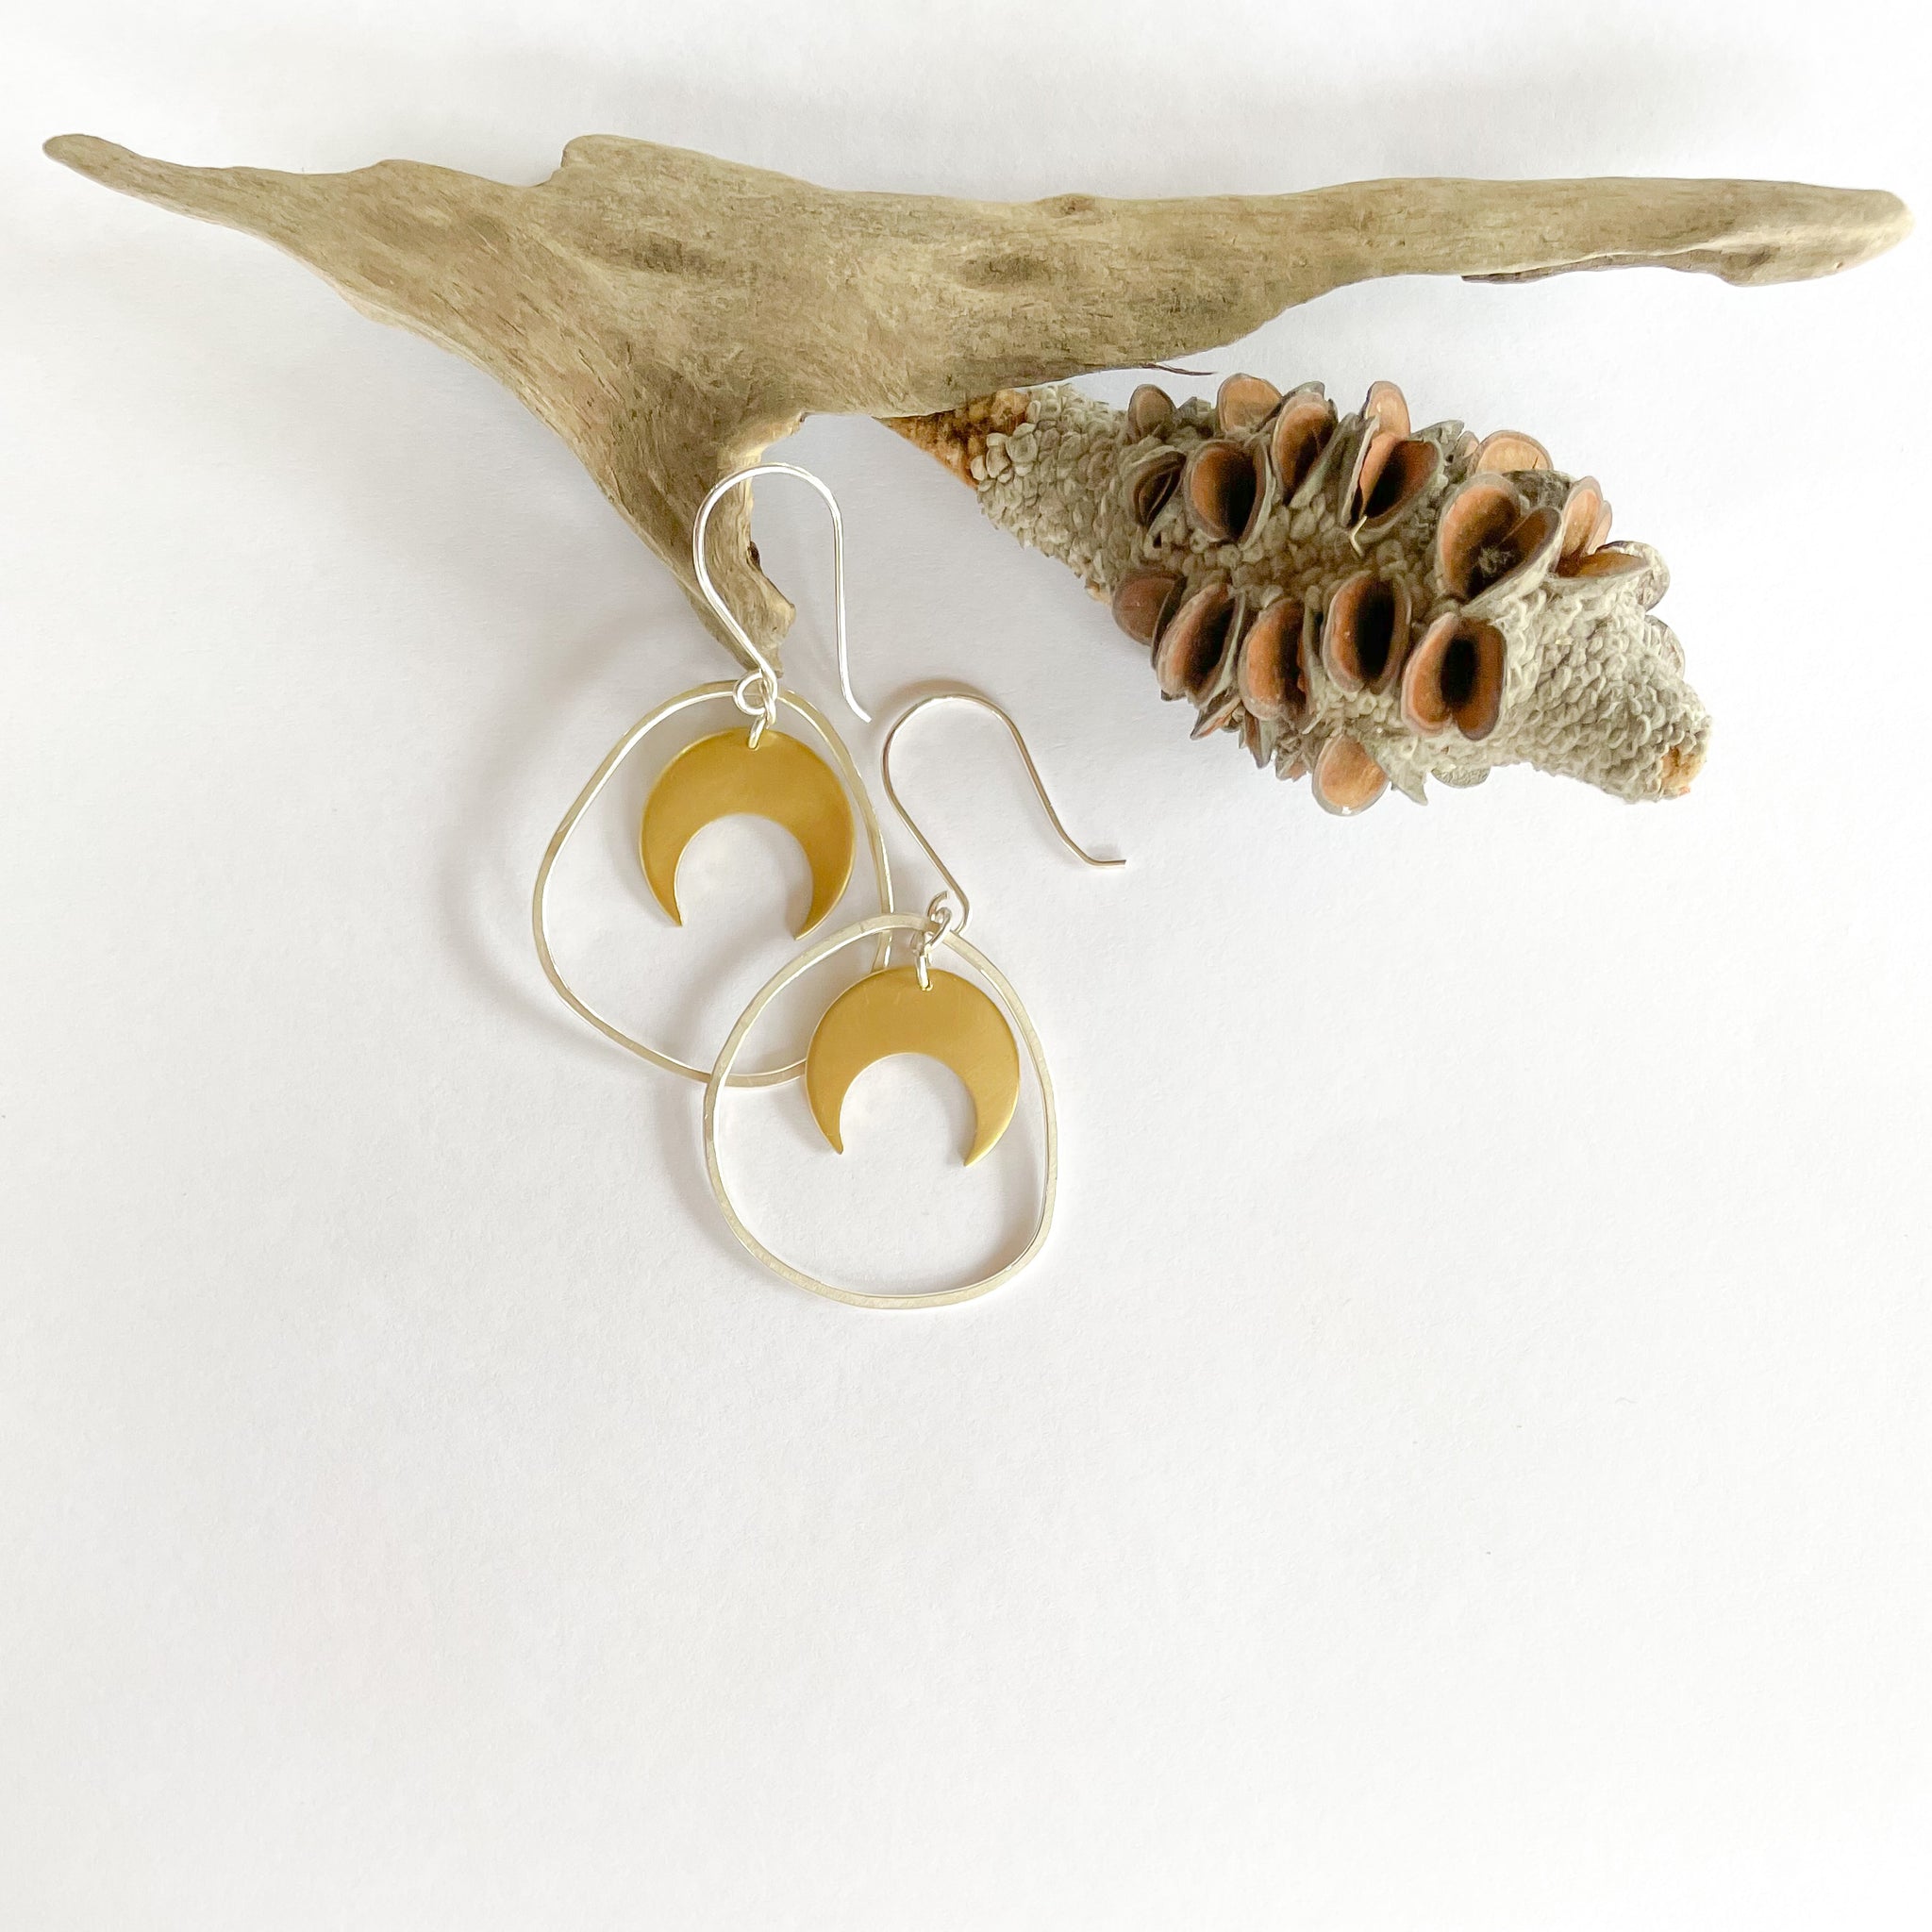 Organic Hoop and Moon Earrings in Silver and Brass